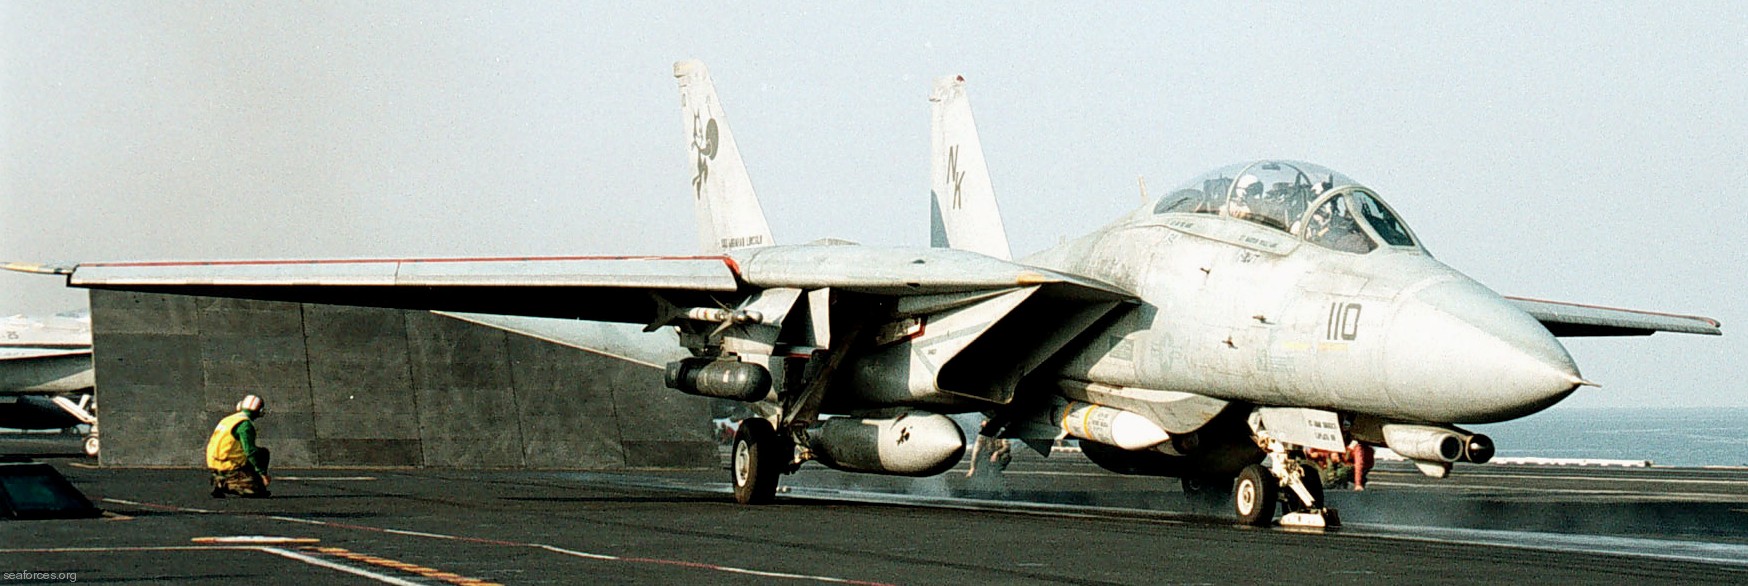 vf-31 tomcatters fighter squadron navy f-14d tomcat cvw-14 uss abraham lincoln cvn-72 114